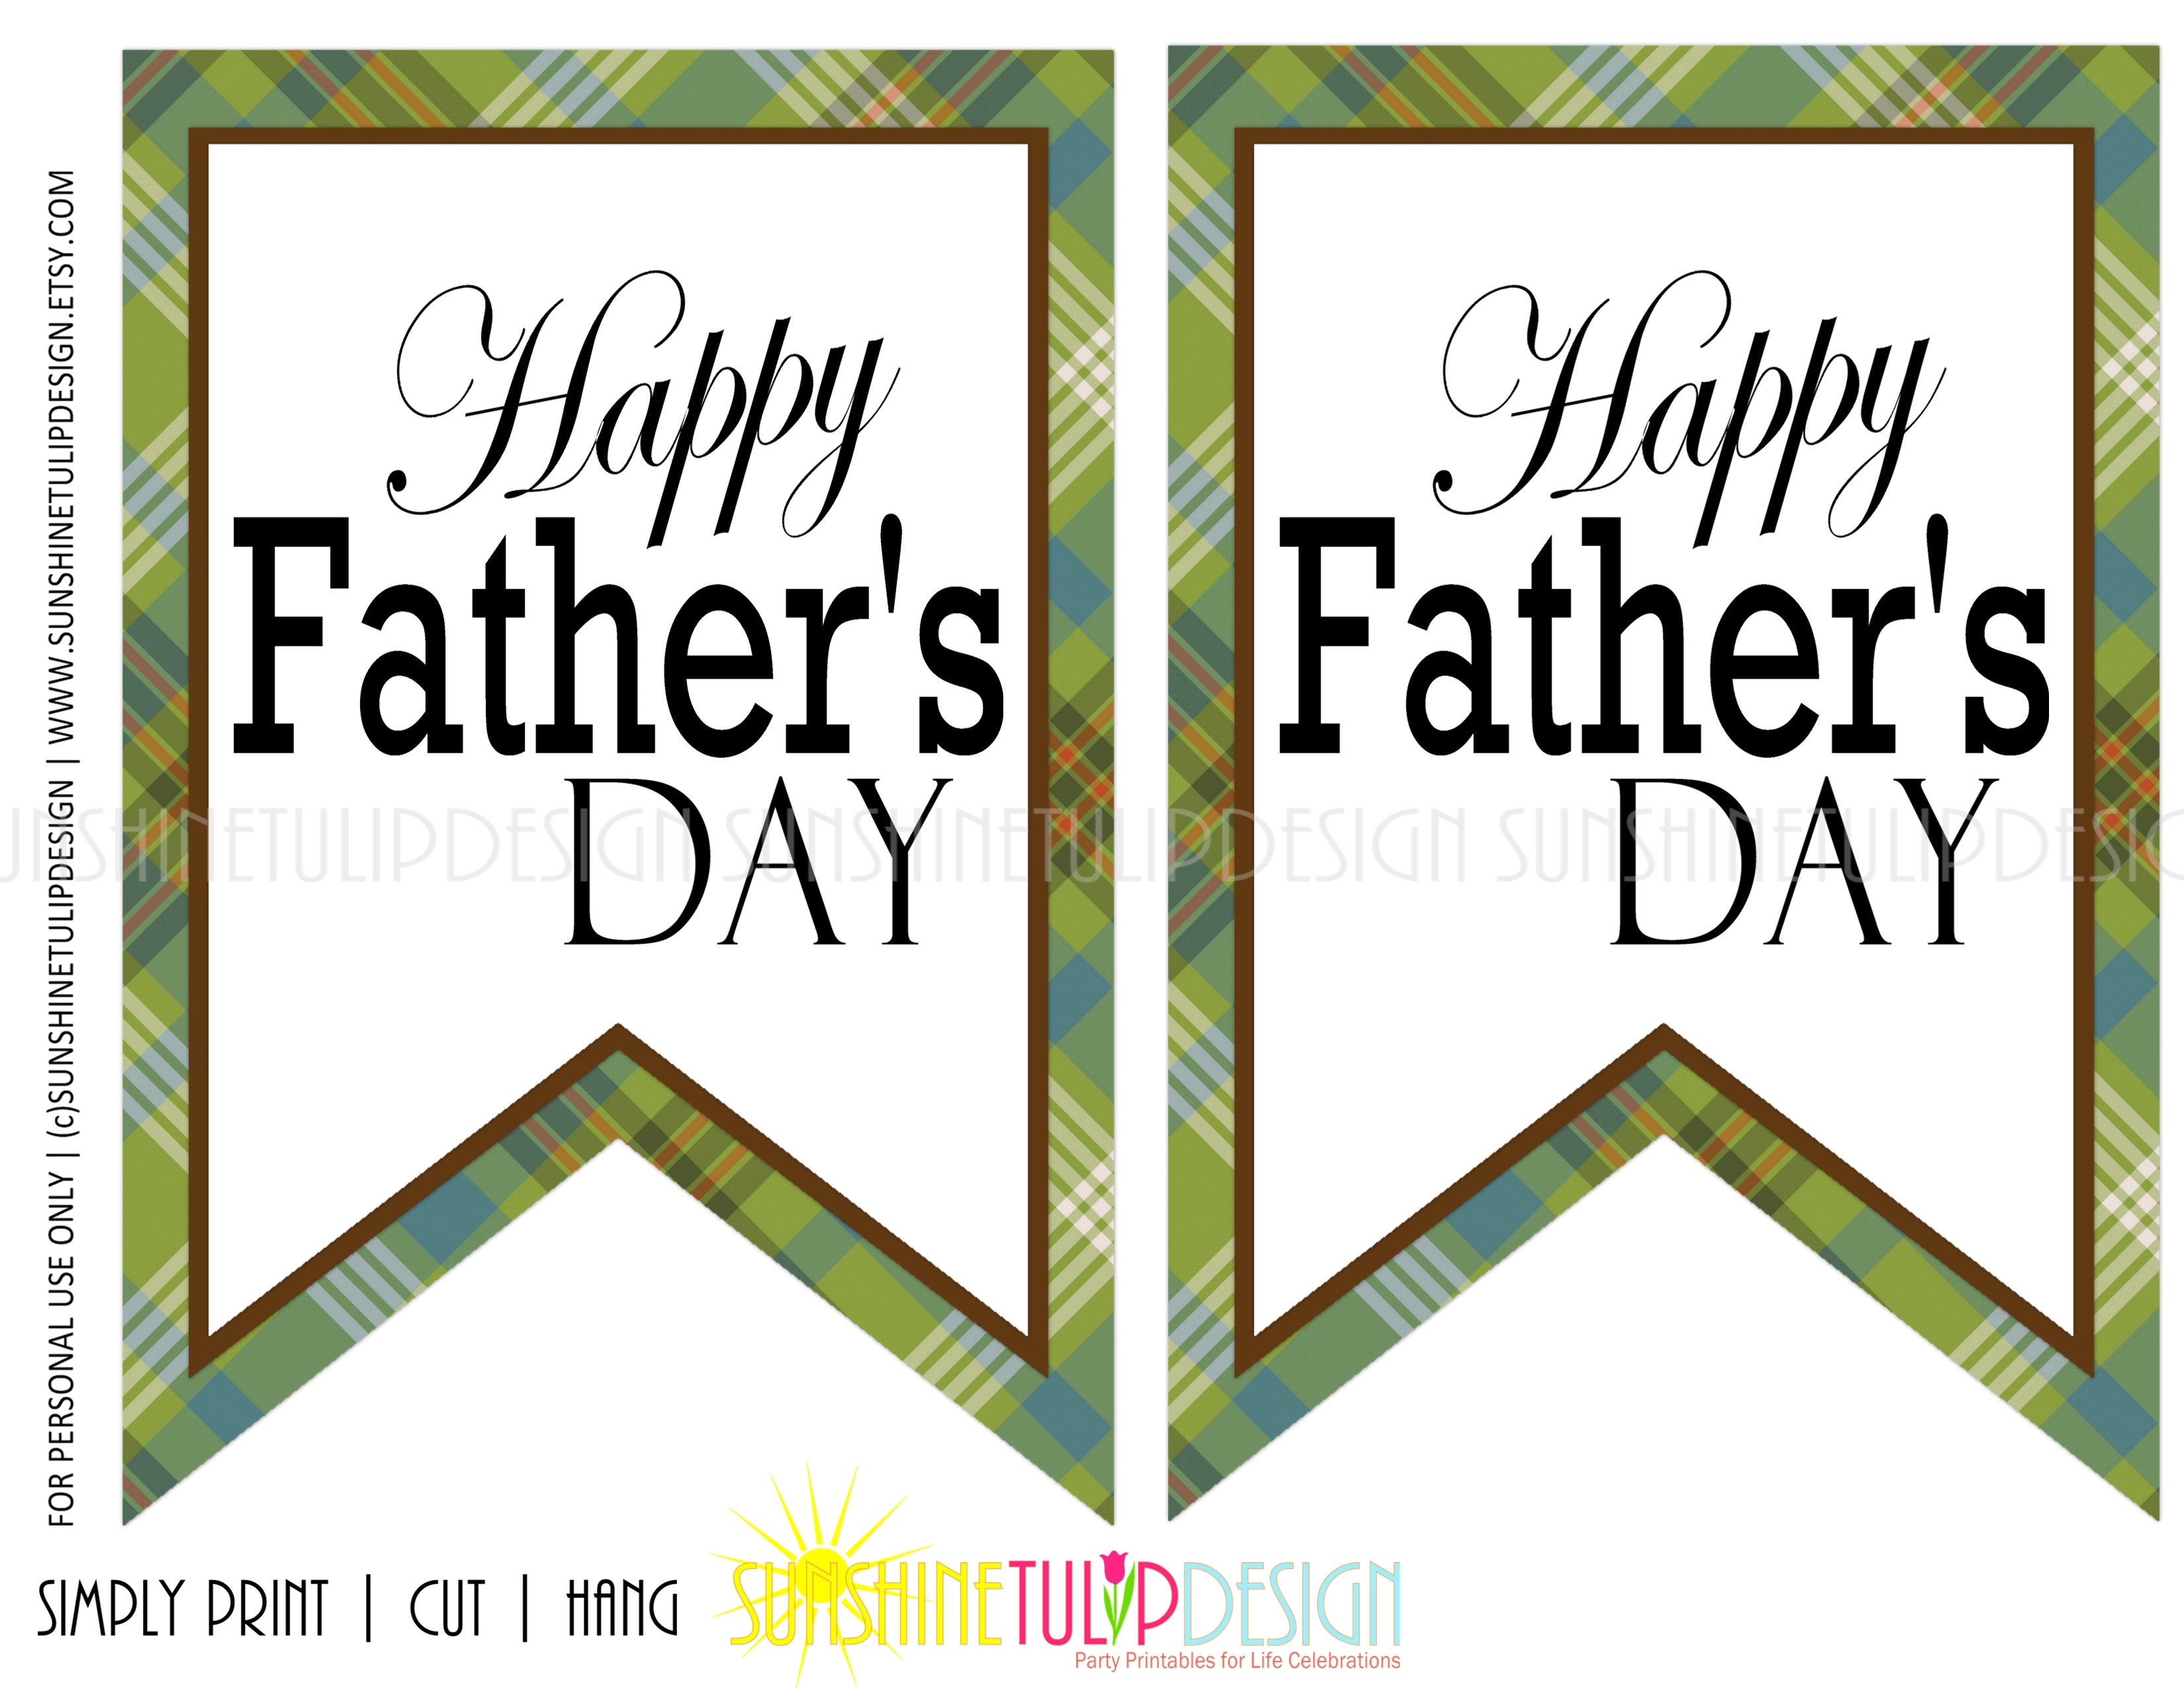 father-s-day-free-printable-fathers-day-banners-free-printable-templates